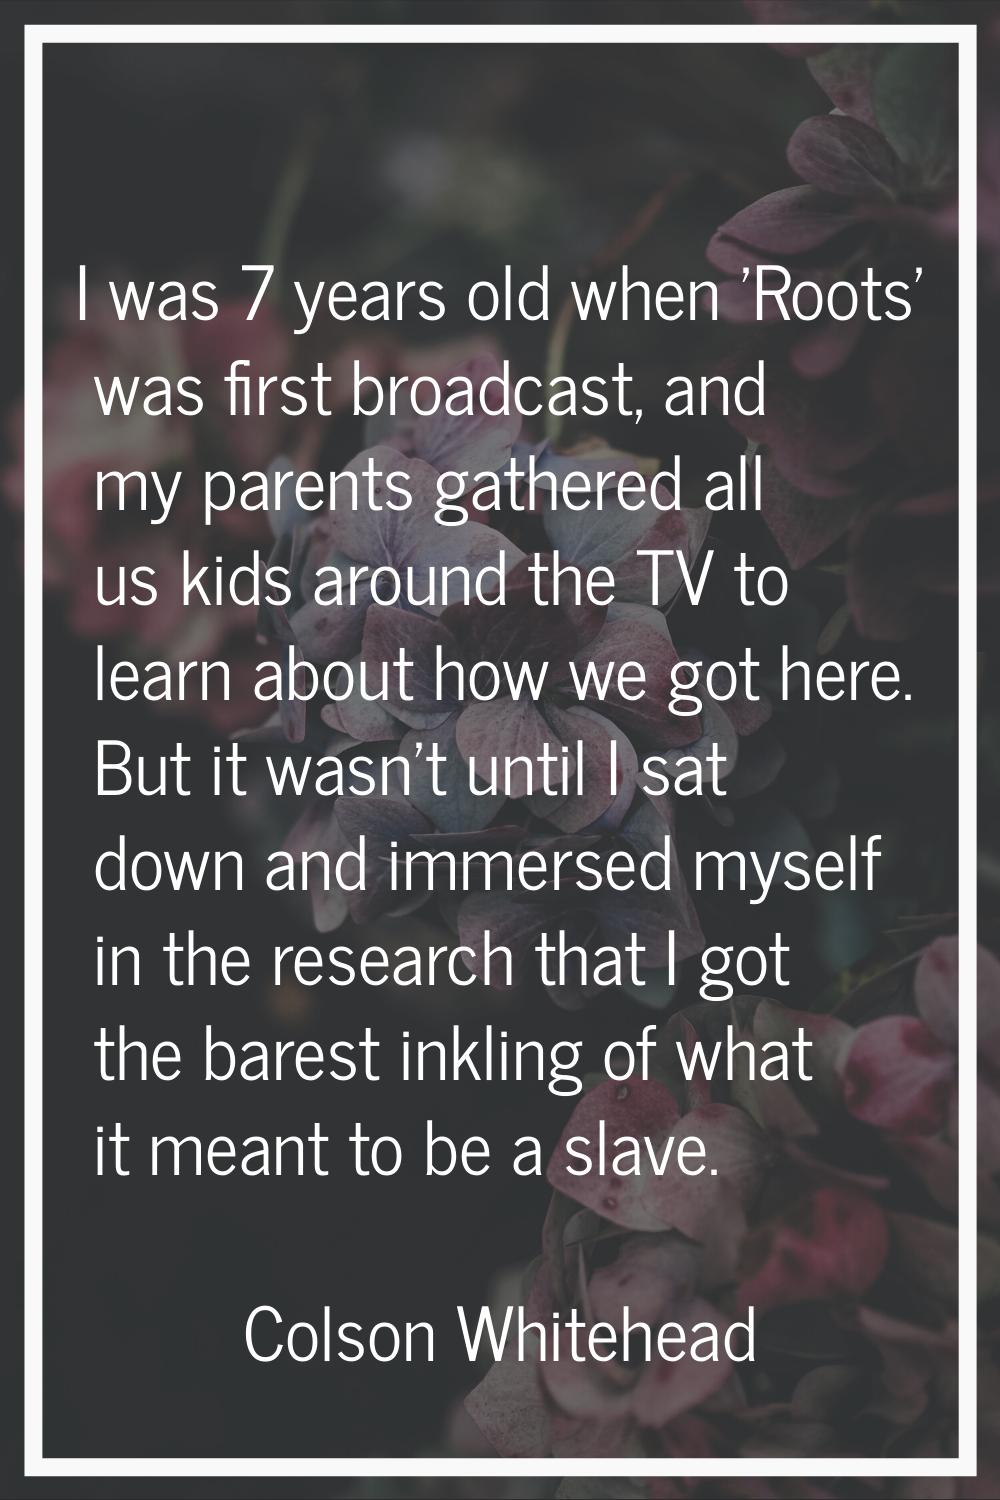 I was 7 years old when 'Roots' was first broadcast, and my parents gathered all us kids around the 